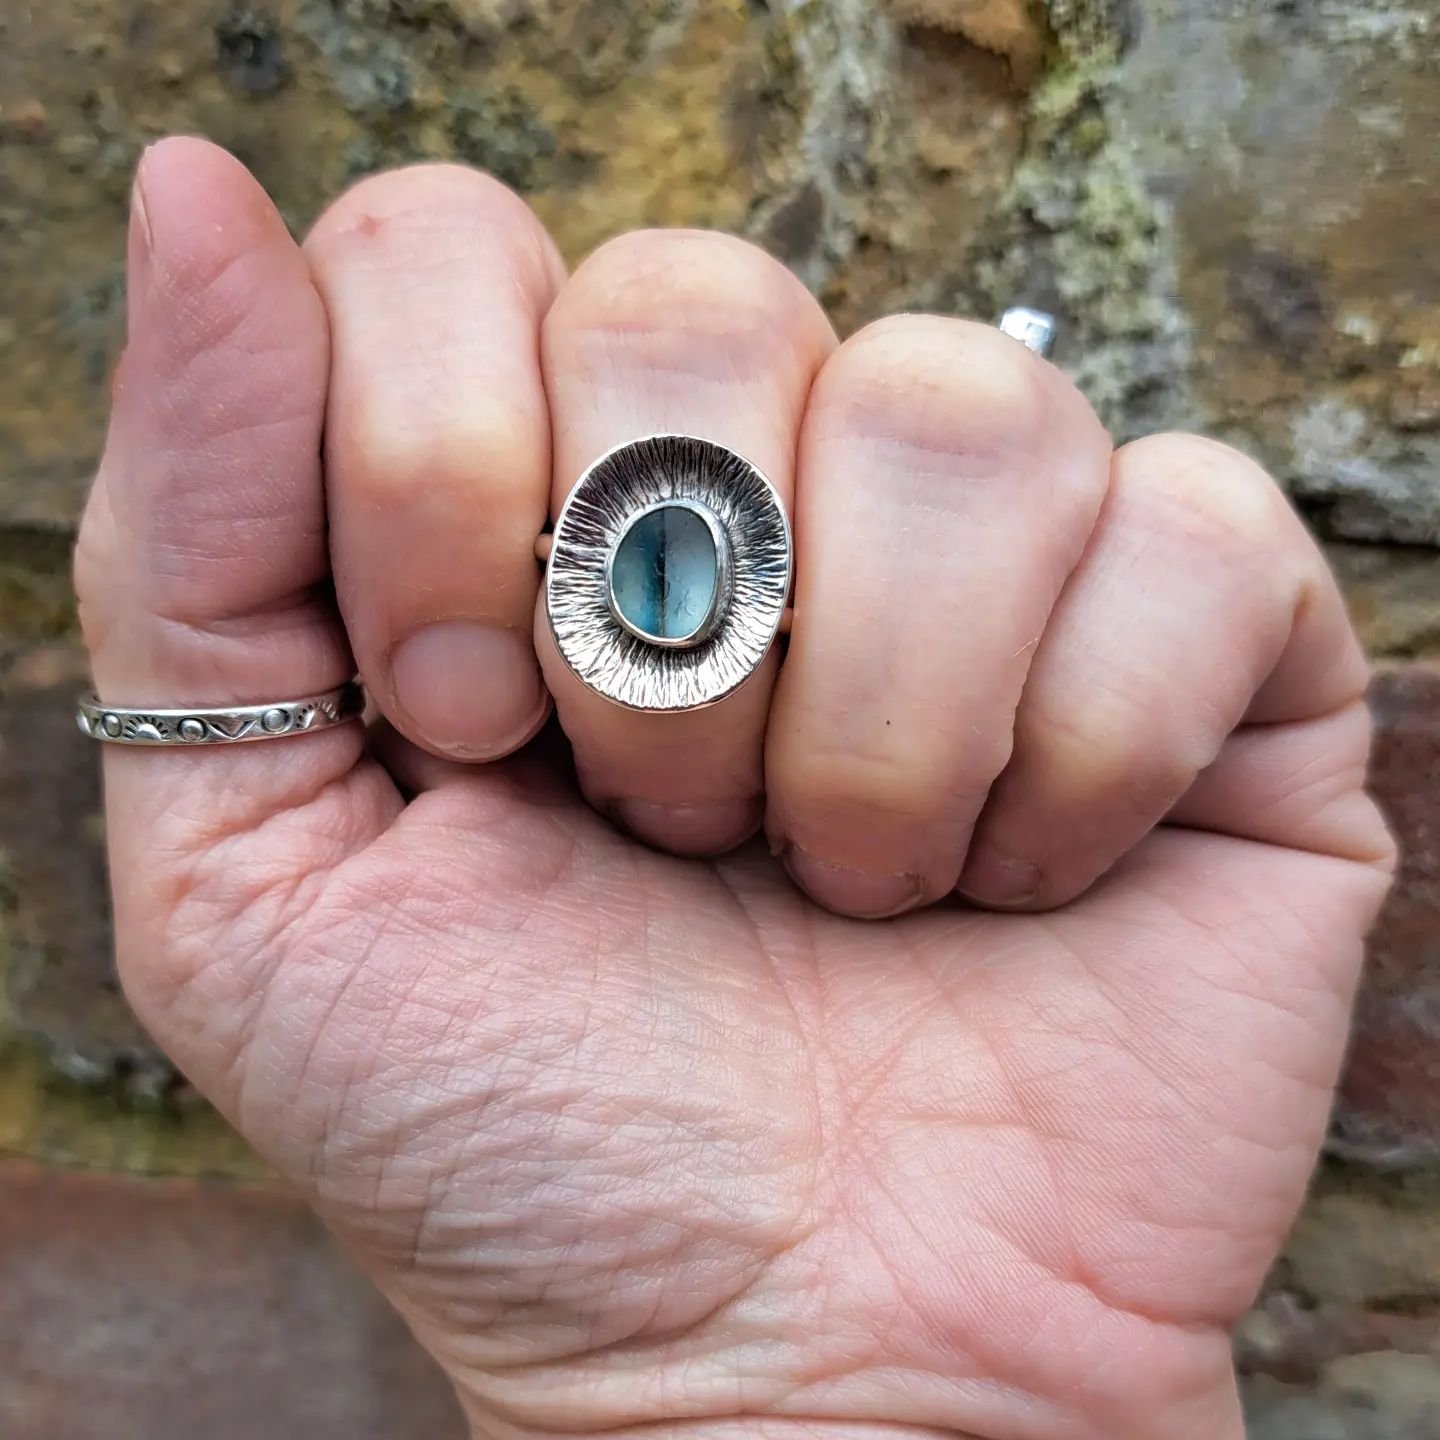 Here's a little close up of the Seaham multi sea glass ring I finished the other day. I've got a few other pieces in the pipeline but no time for any large releases at the moment. I've been a bit under the weather with some sort of cold, with a block